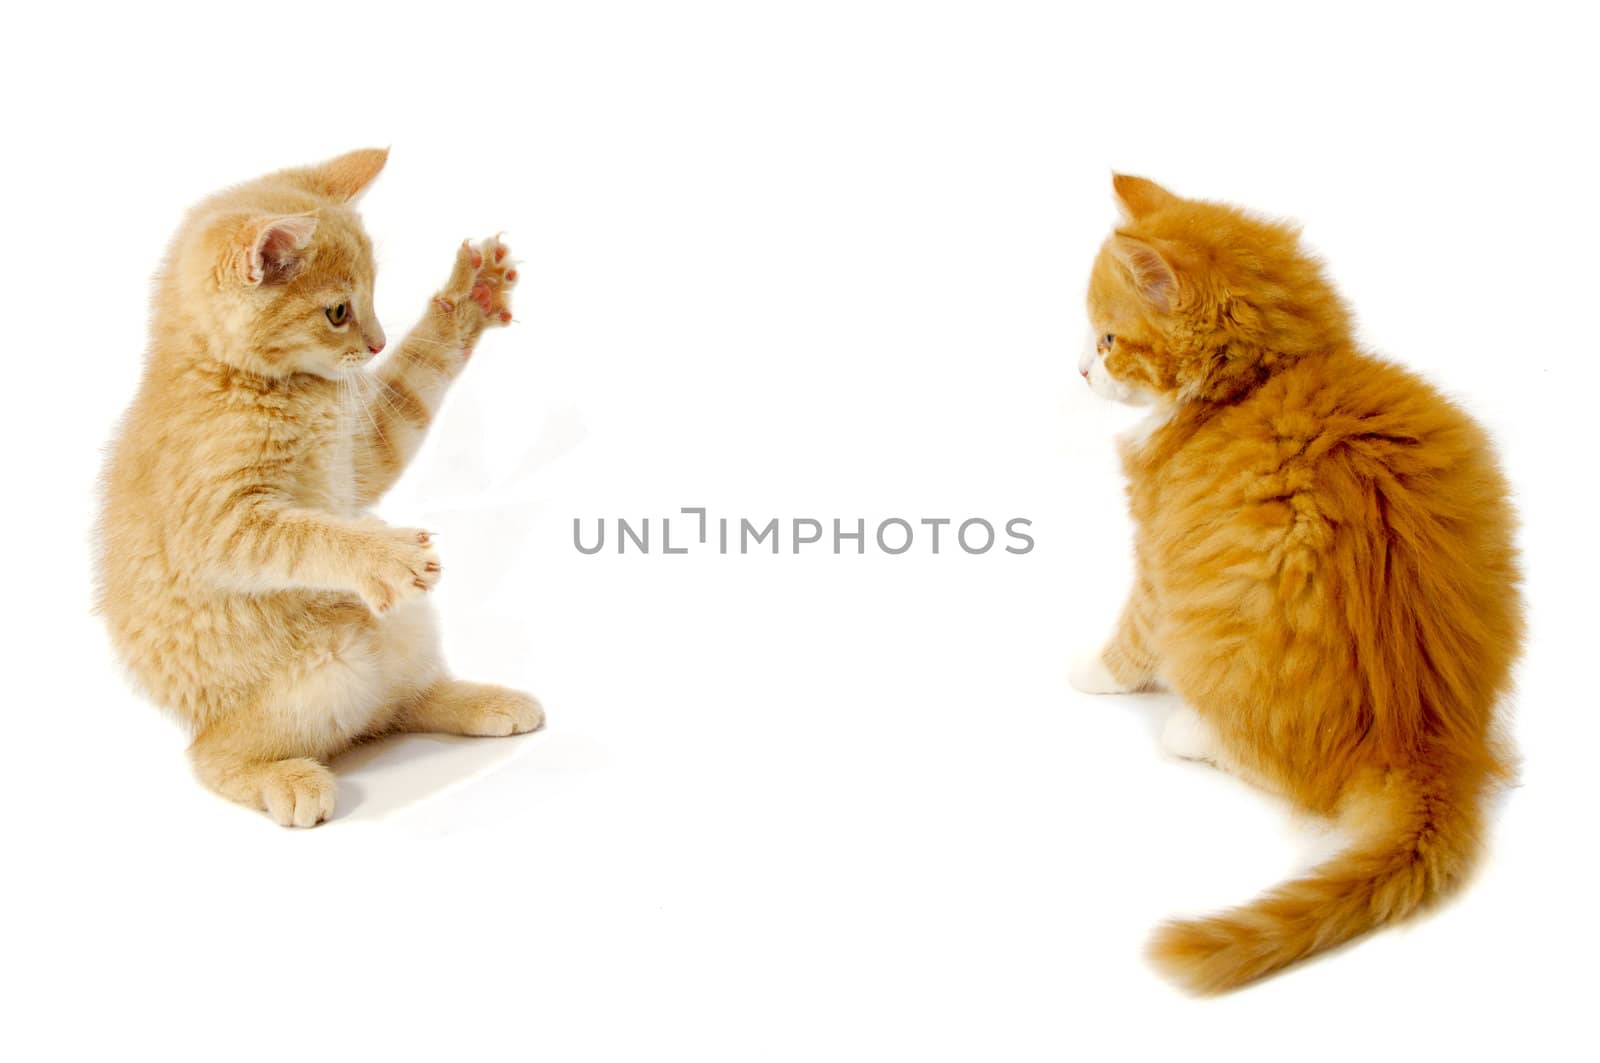 Sweet kittens are just about to fight on a white background.